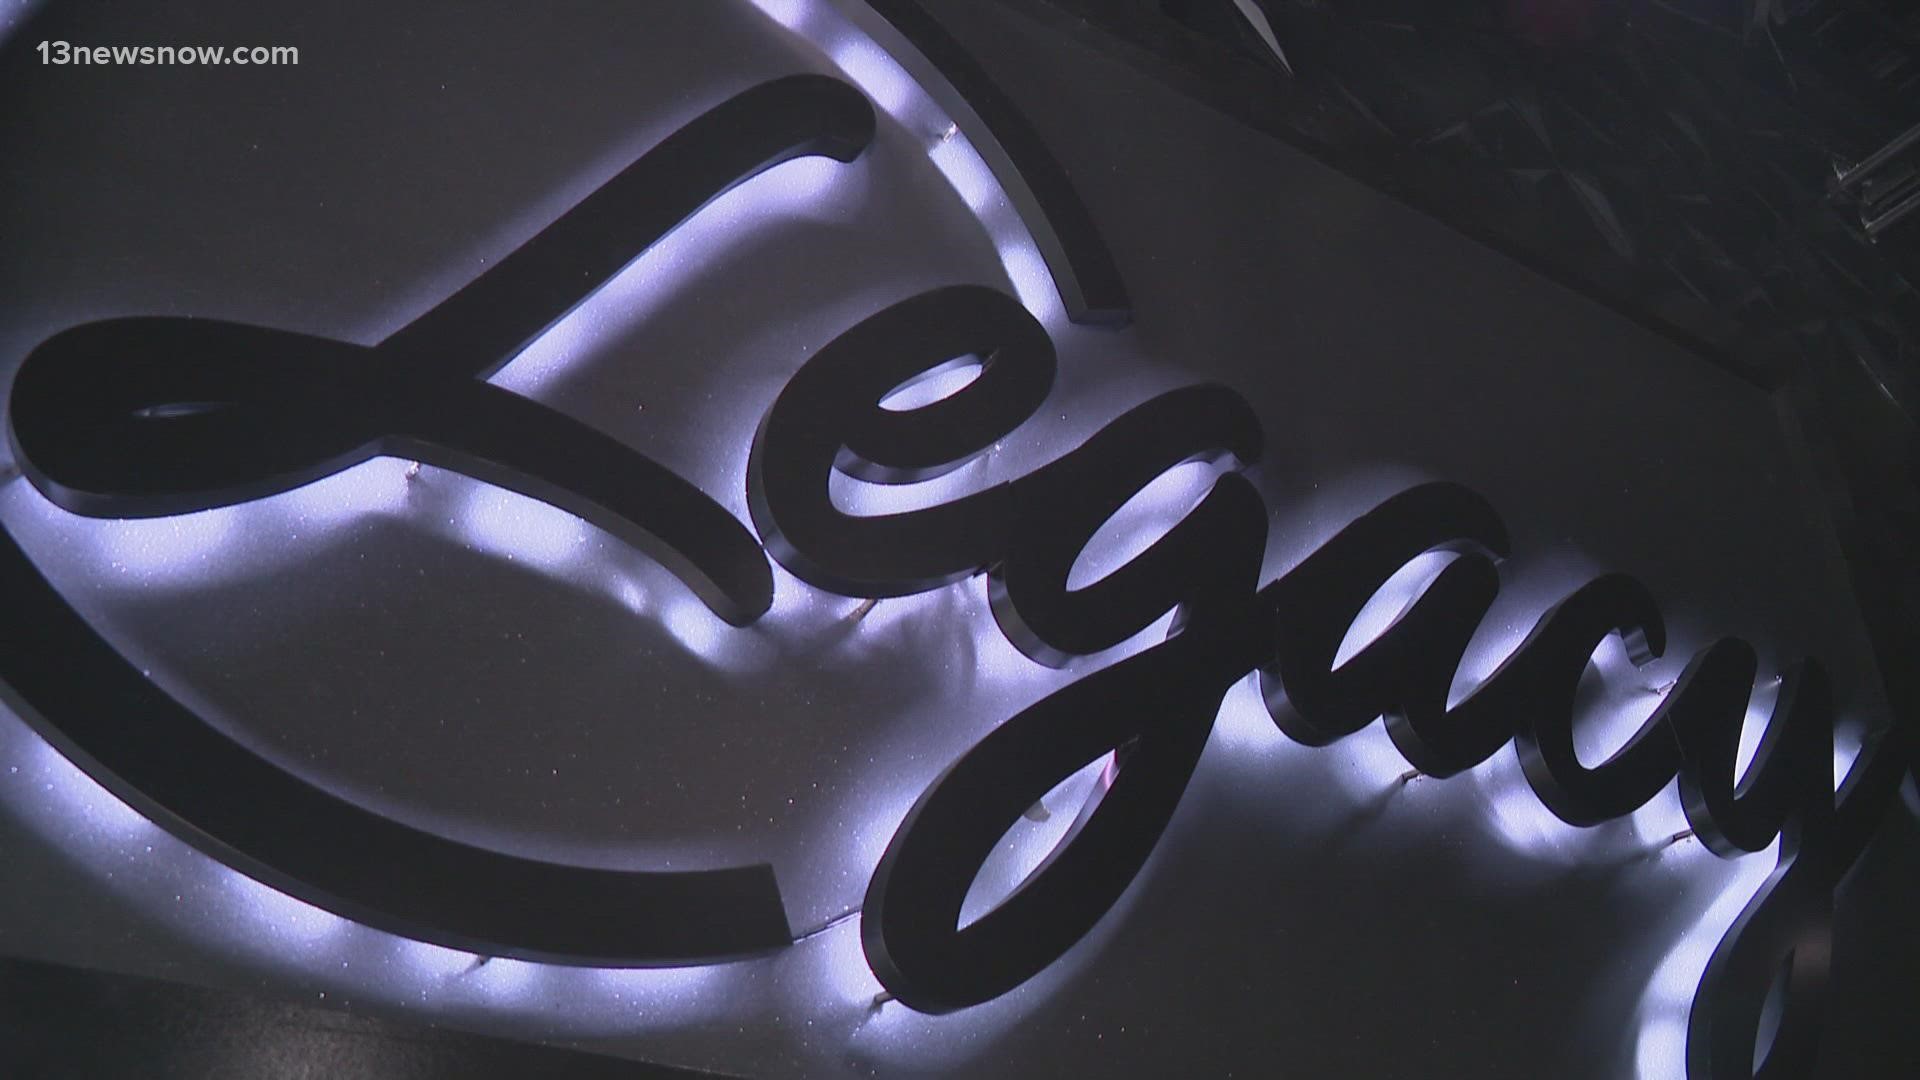 The owners of Legacy Restaurant and Lounge will have to wait a little longer to find out if they'll get their permit back